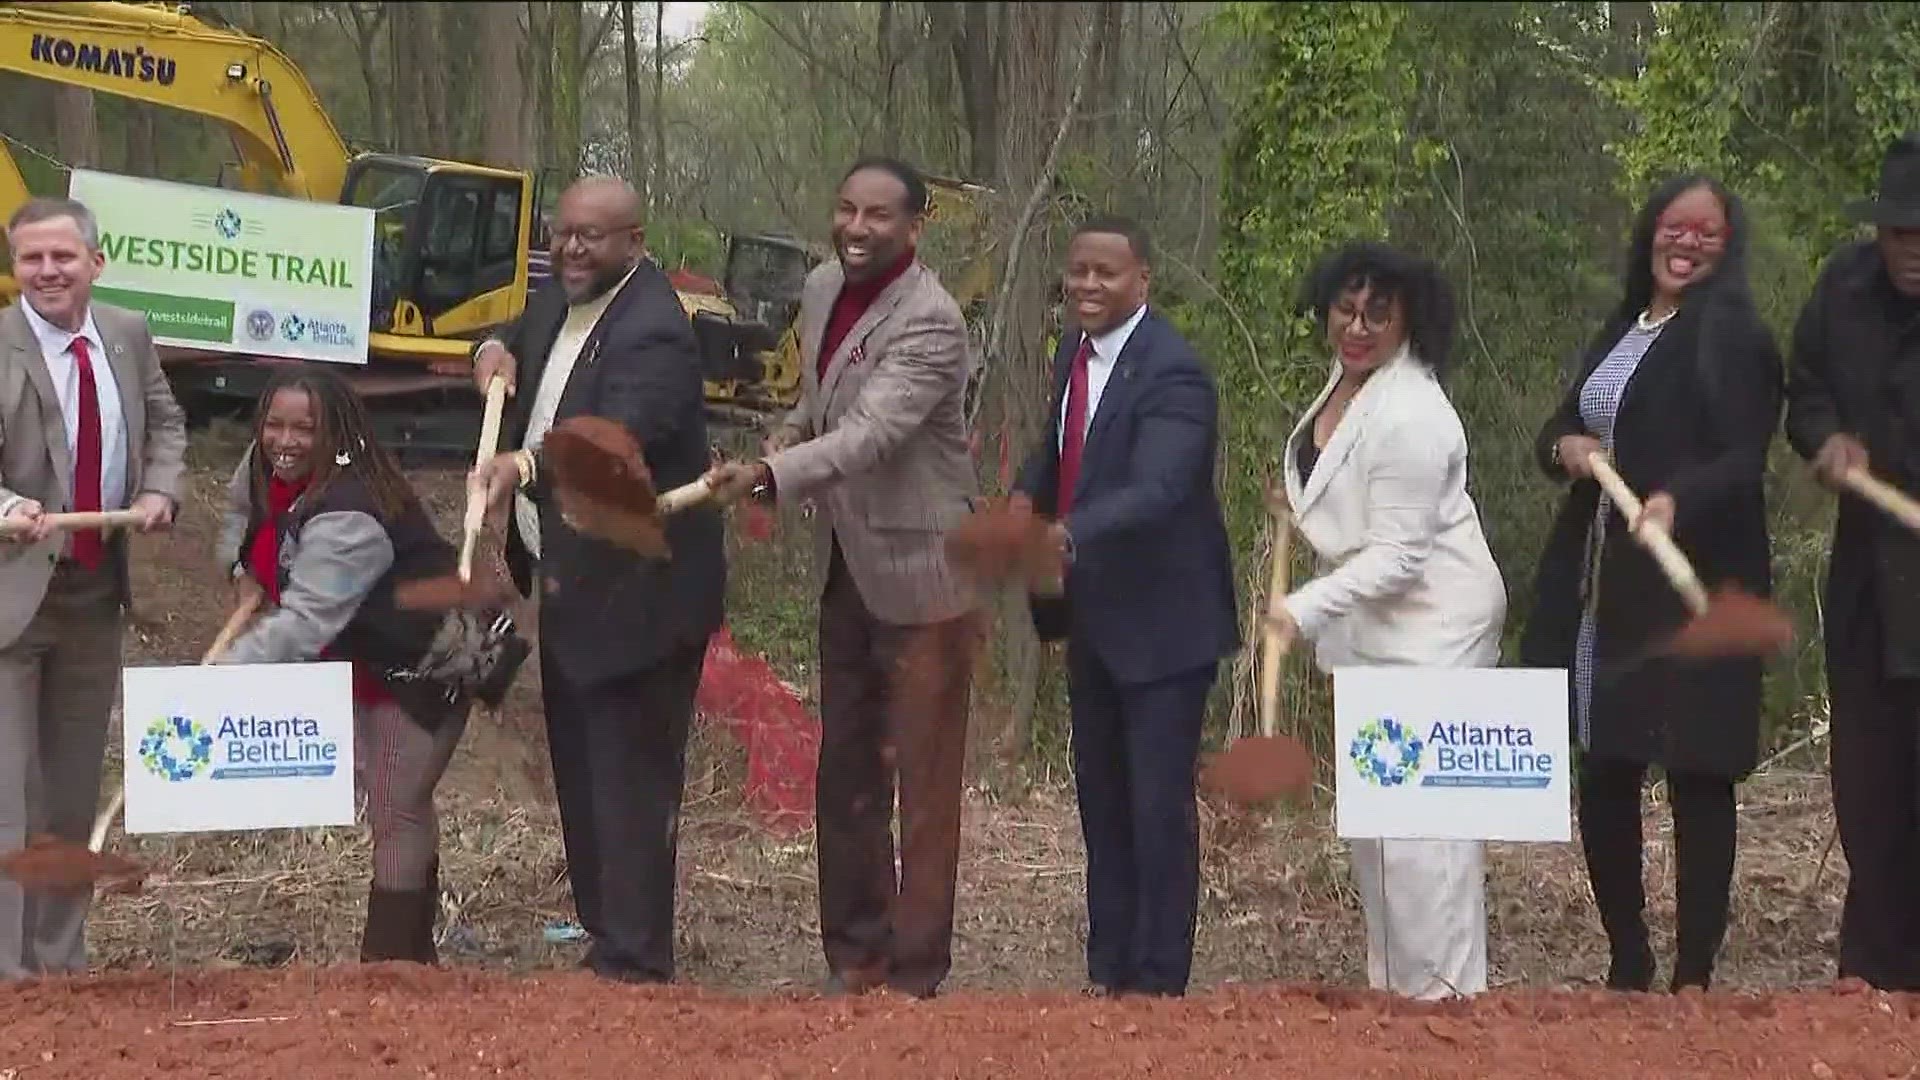 City officials broke ground on the west side of theBeltLine. The target completion date is 2030.